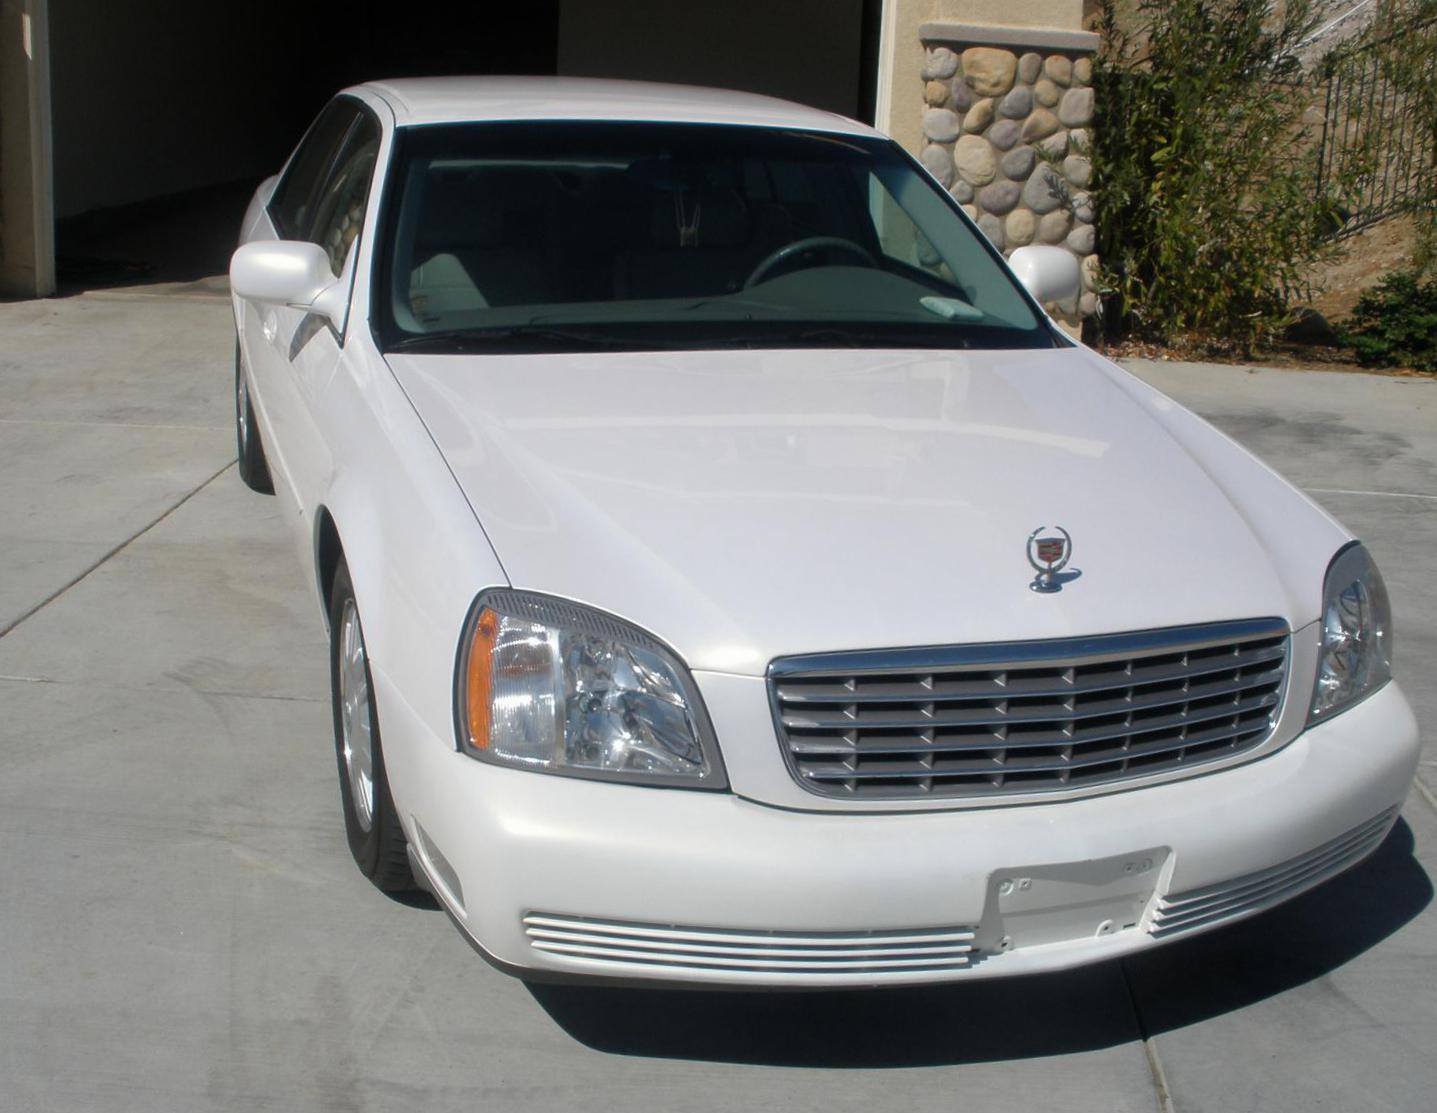 Cadillac DTS Photos and Specs. Photo: Cadillac DTS cost and 22 perfect ...